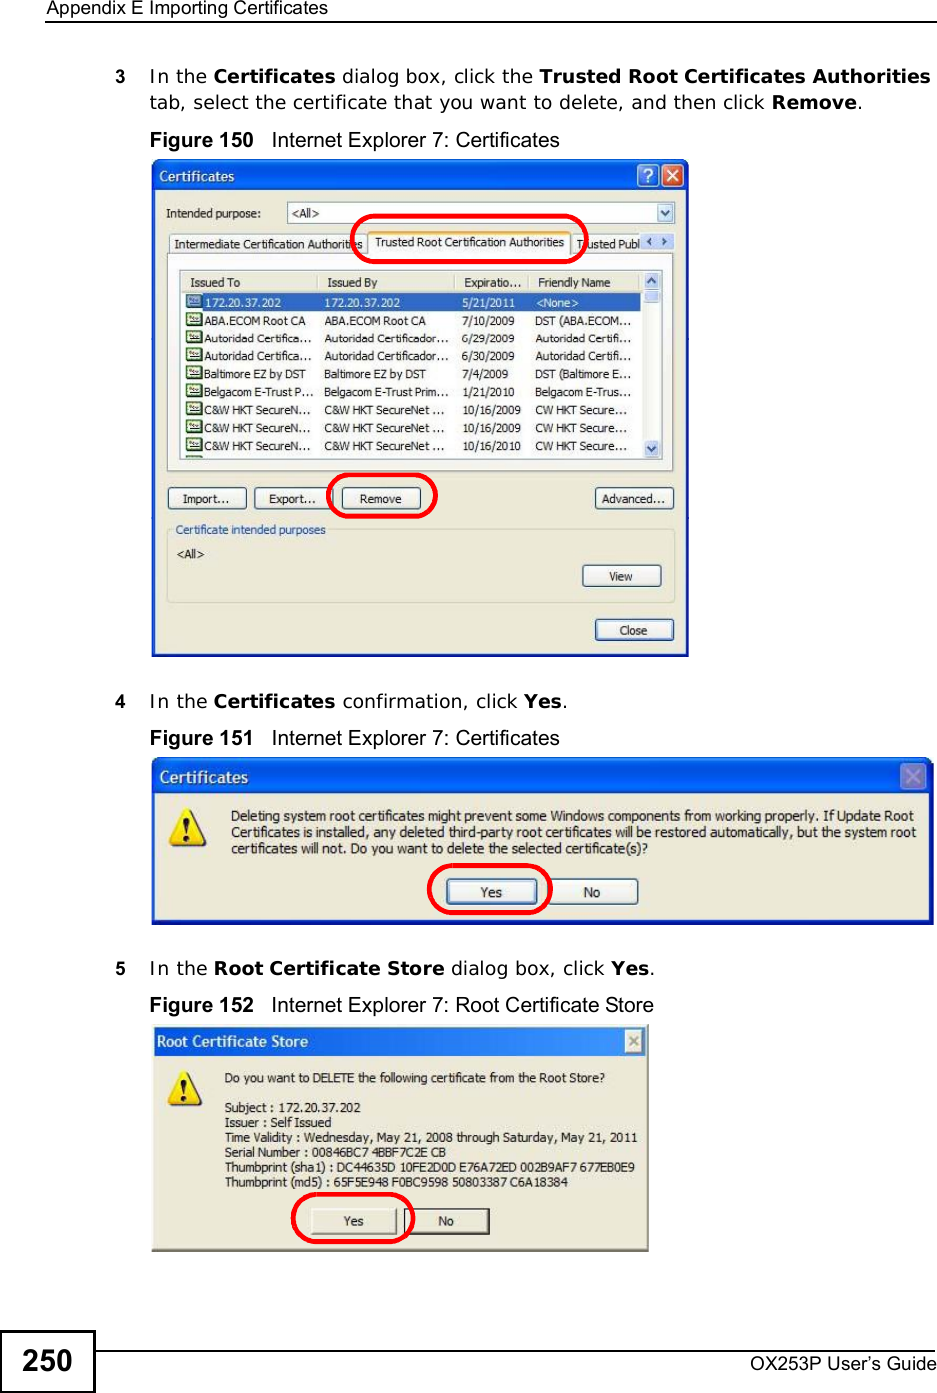 Appendix EImporting CertificatesOX253P User’s Guide2503In the Certificates dialog box, click the Trusted Root Certificates Authoritiestab, select the certificate that you want to delete, and then click Remove.Figure 150   Internet Explorer 7: Certificates4In the Certificates confirmation, click Yes.Figure 151   Internet Explorer 7: Certificates5In the Root Certificate Store dialog box, click Yes.Figure 152   Internet Explorer 7: Root Certificate Store